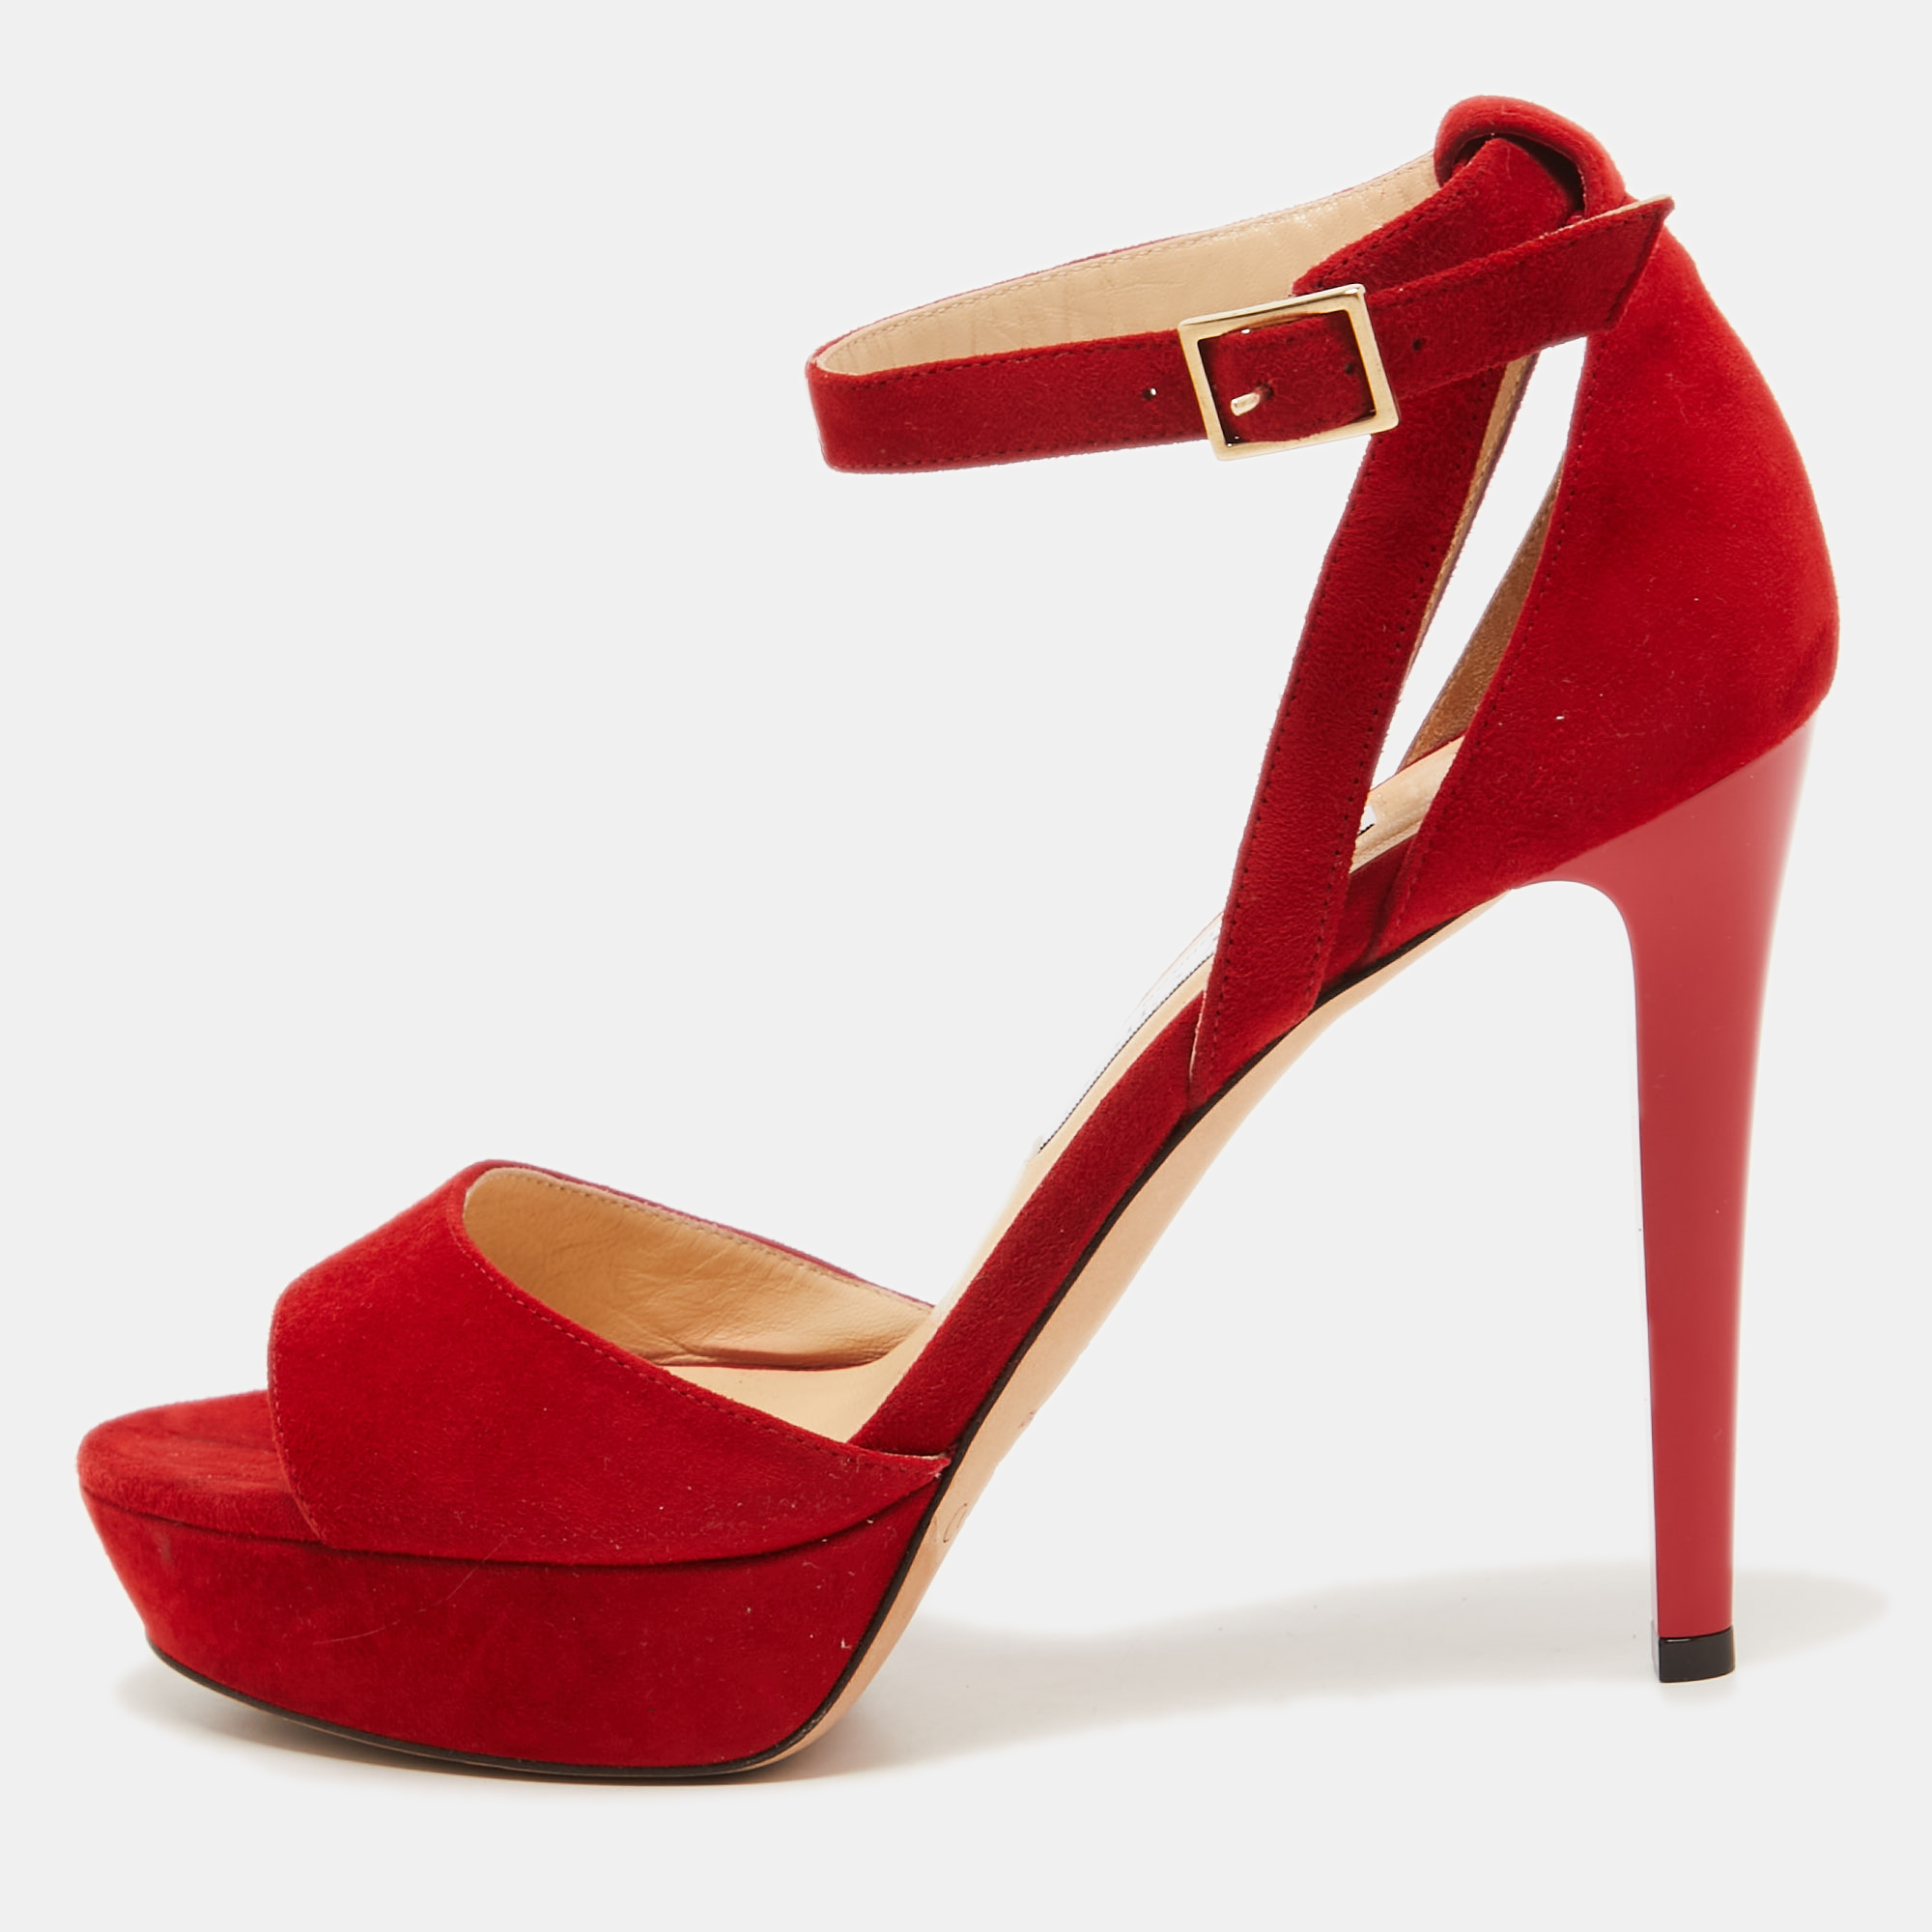 Pre-owned Jimmy Choo Red Suede Platform Ankle Strap Sandals Size 38